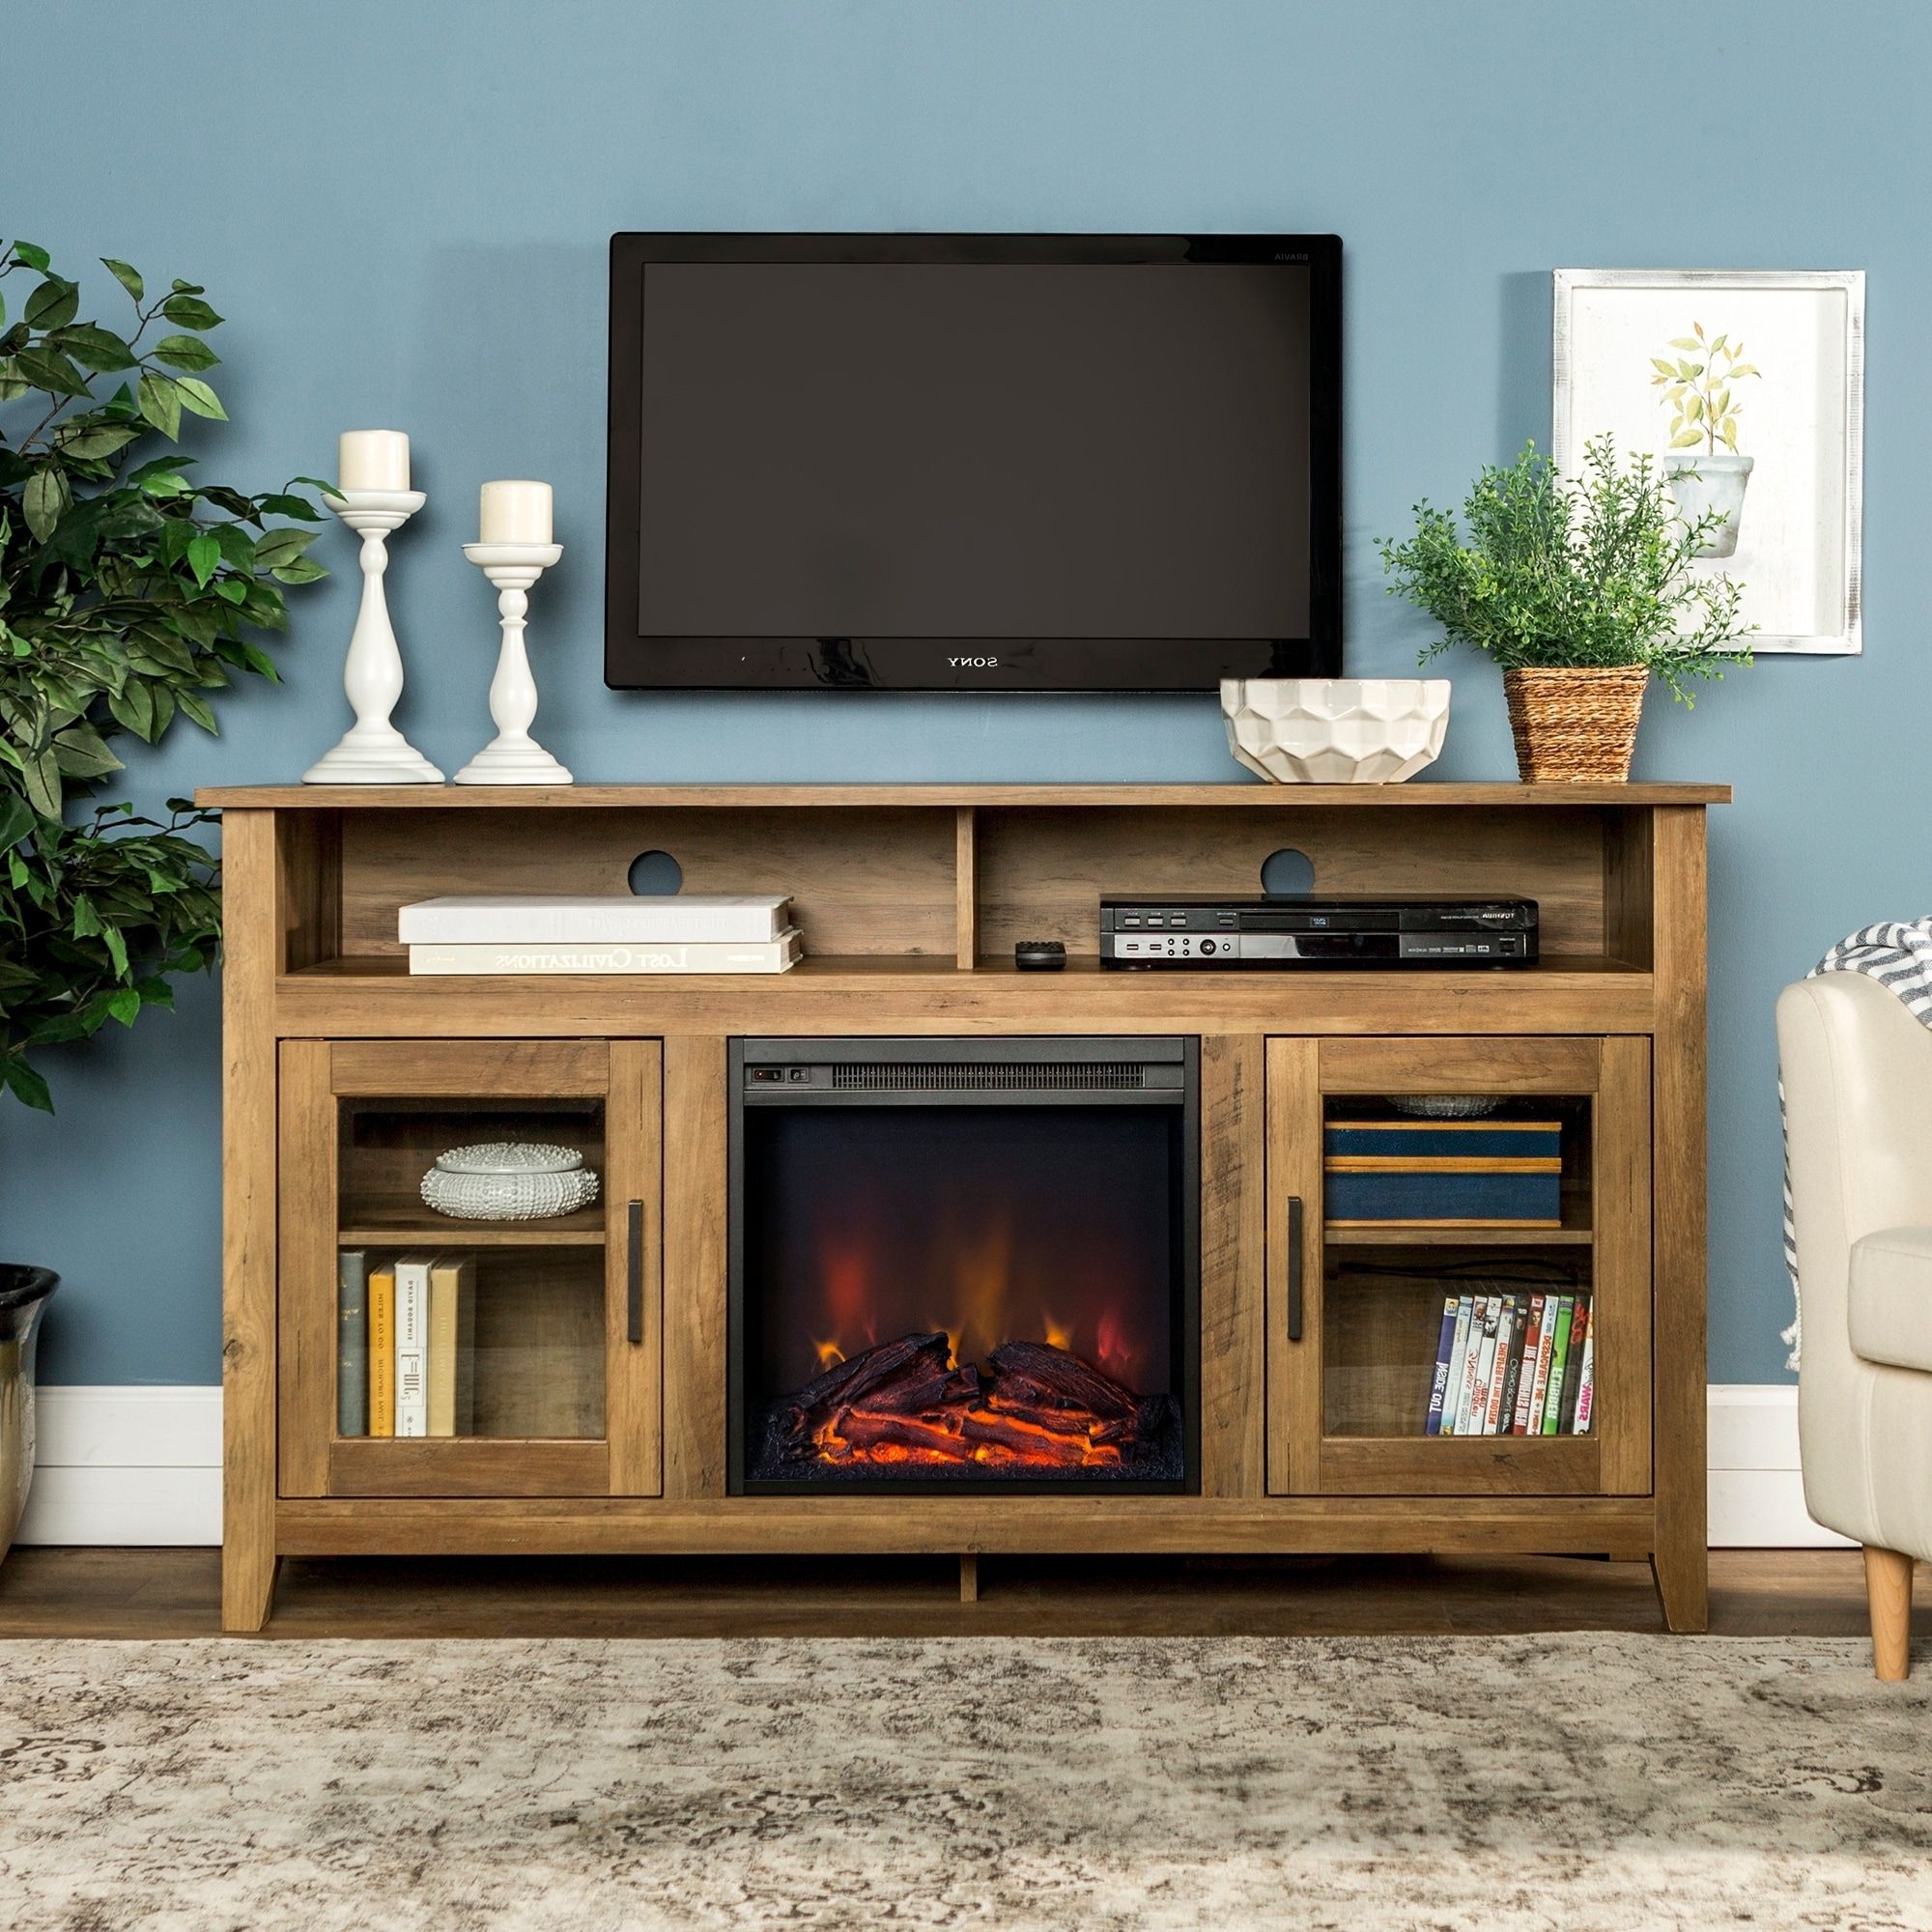 Fireplace Tv Stand Oak | Omeublog Secreto Intended For Modern Farmhouse Fireplace Credenza Tv Stands Rustic Gray Finish (View 2 of 20)